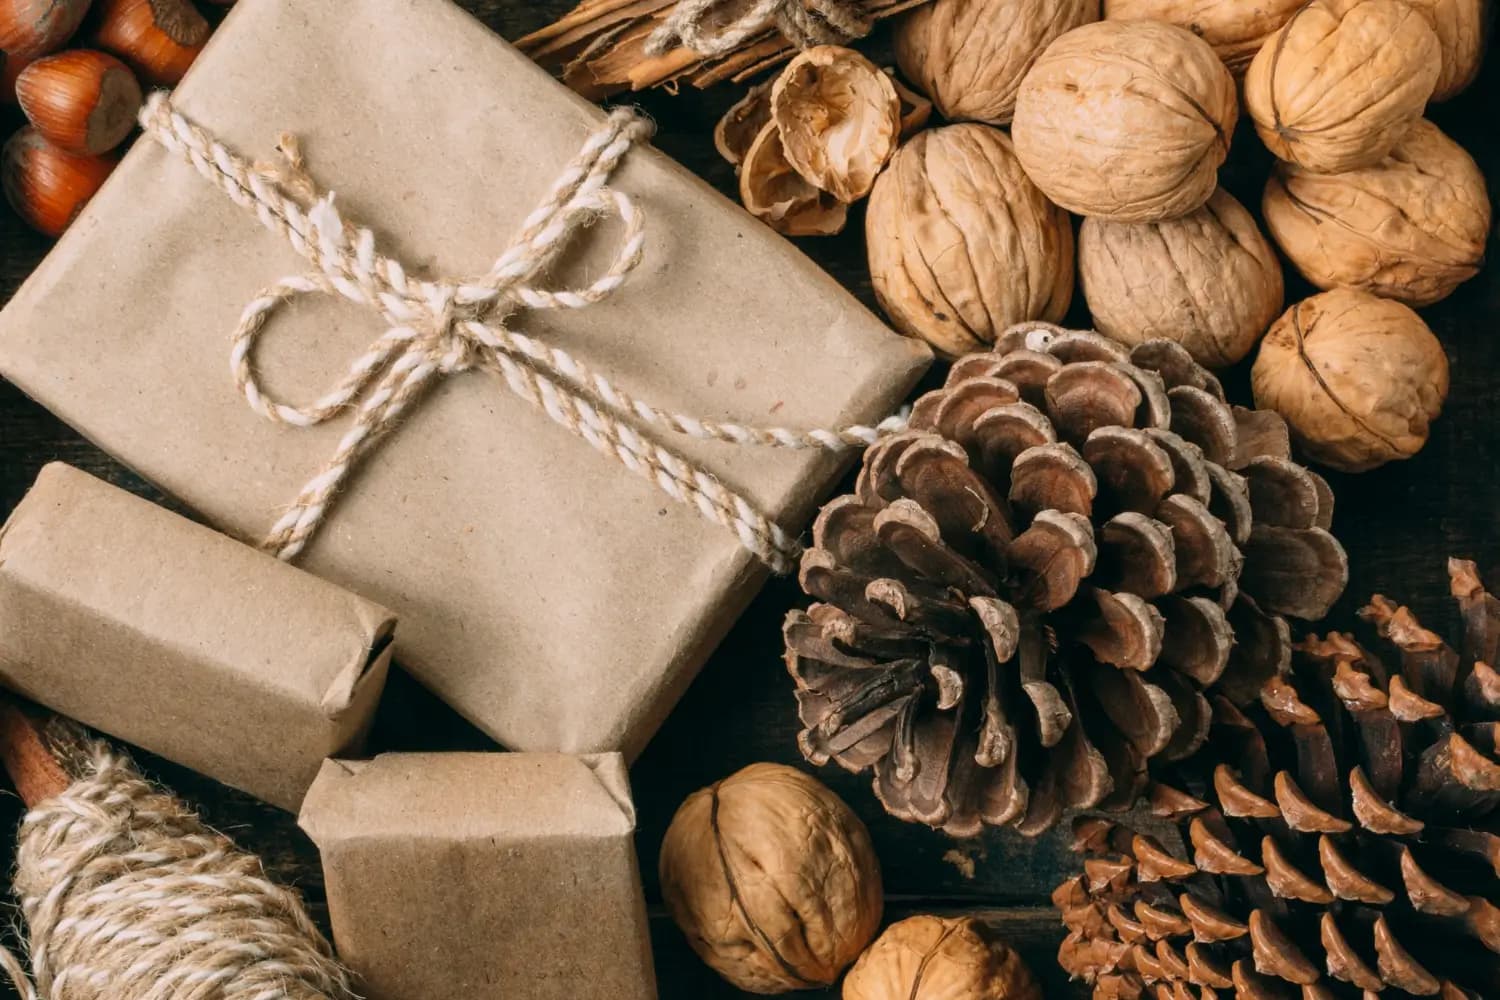 Gift Package and Pinecones